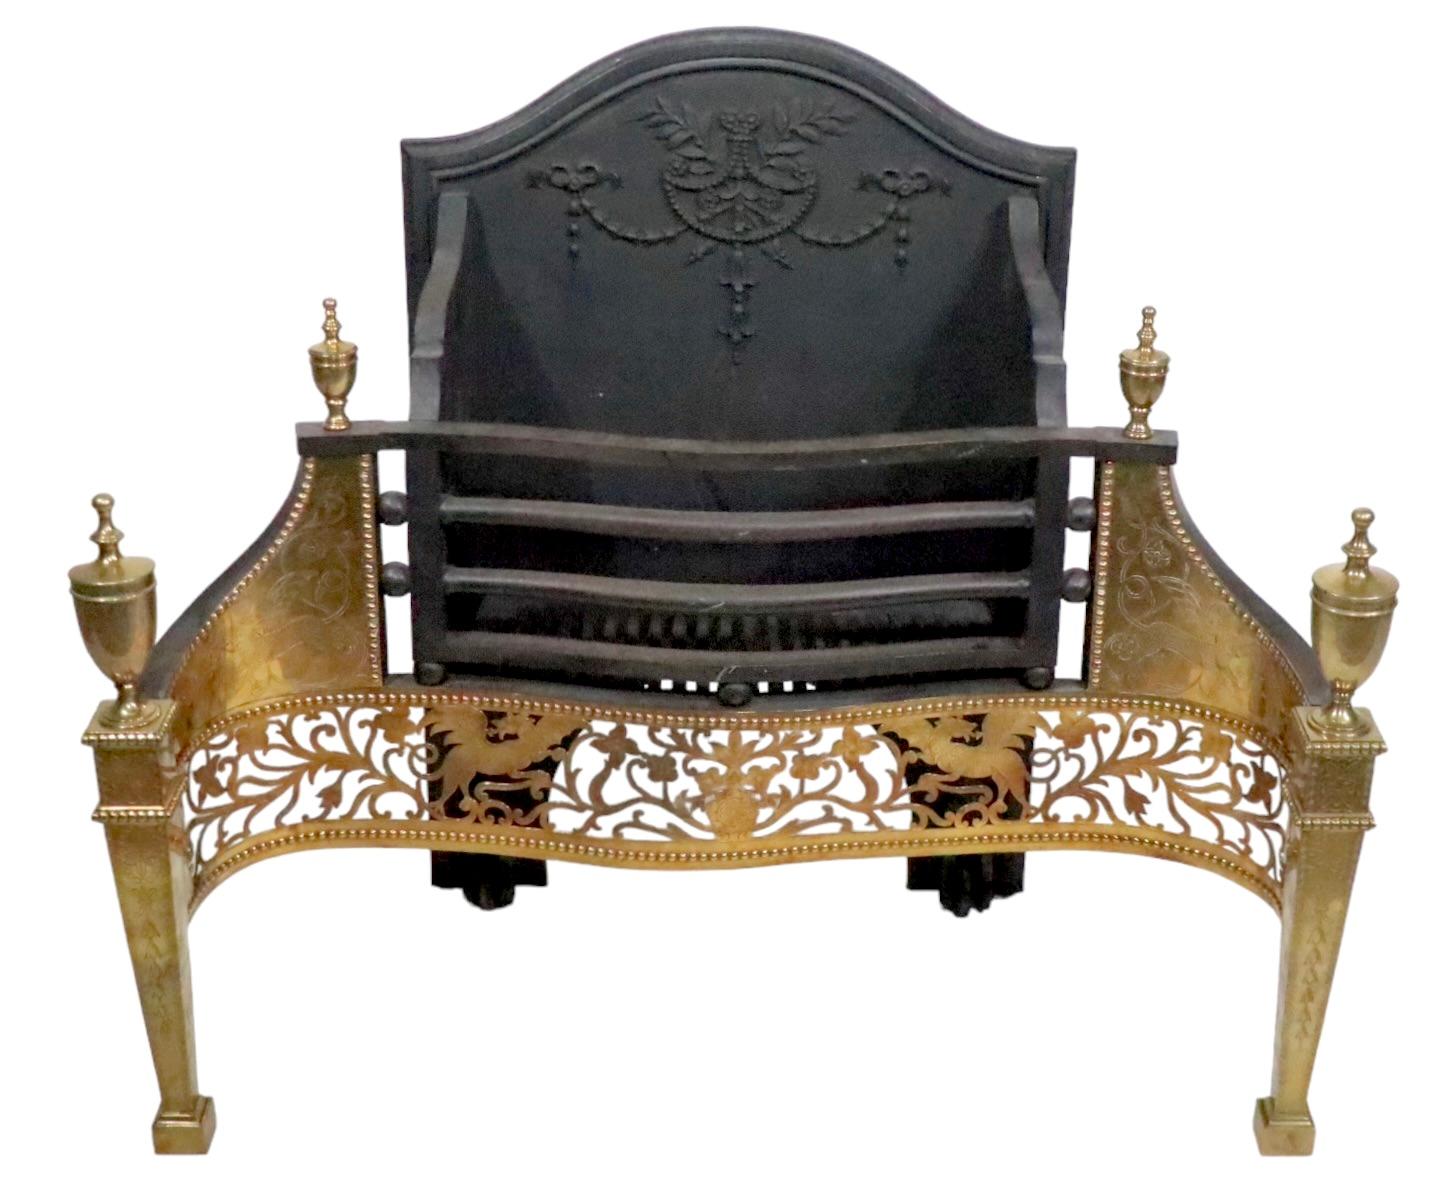 Impressive English  fireplace coal grate insert having a cast iron frame with decorative foliate elements, fronted by a bright solid brass structure with a hand etched surface, showing fantastical winged animals  etc,  and tapering fluted column